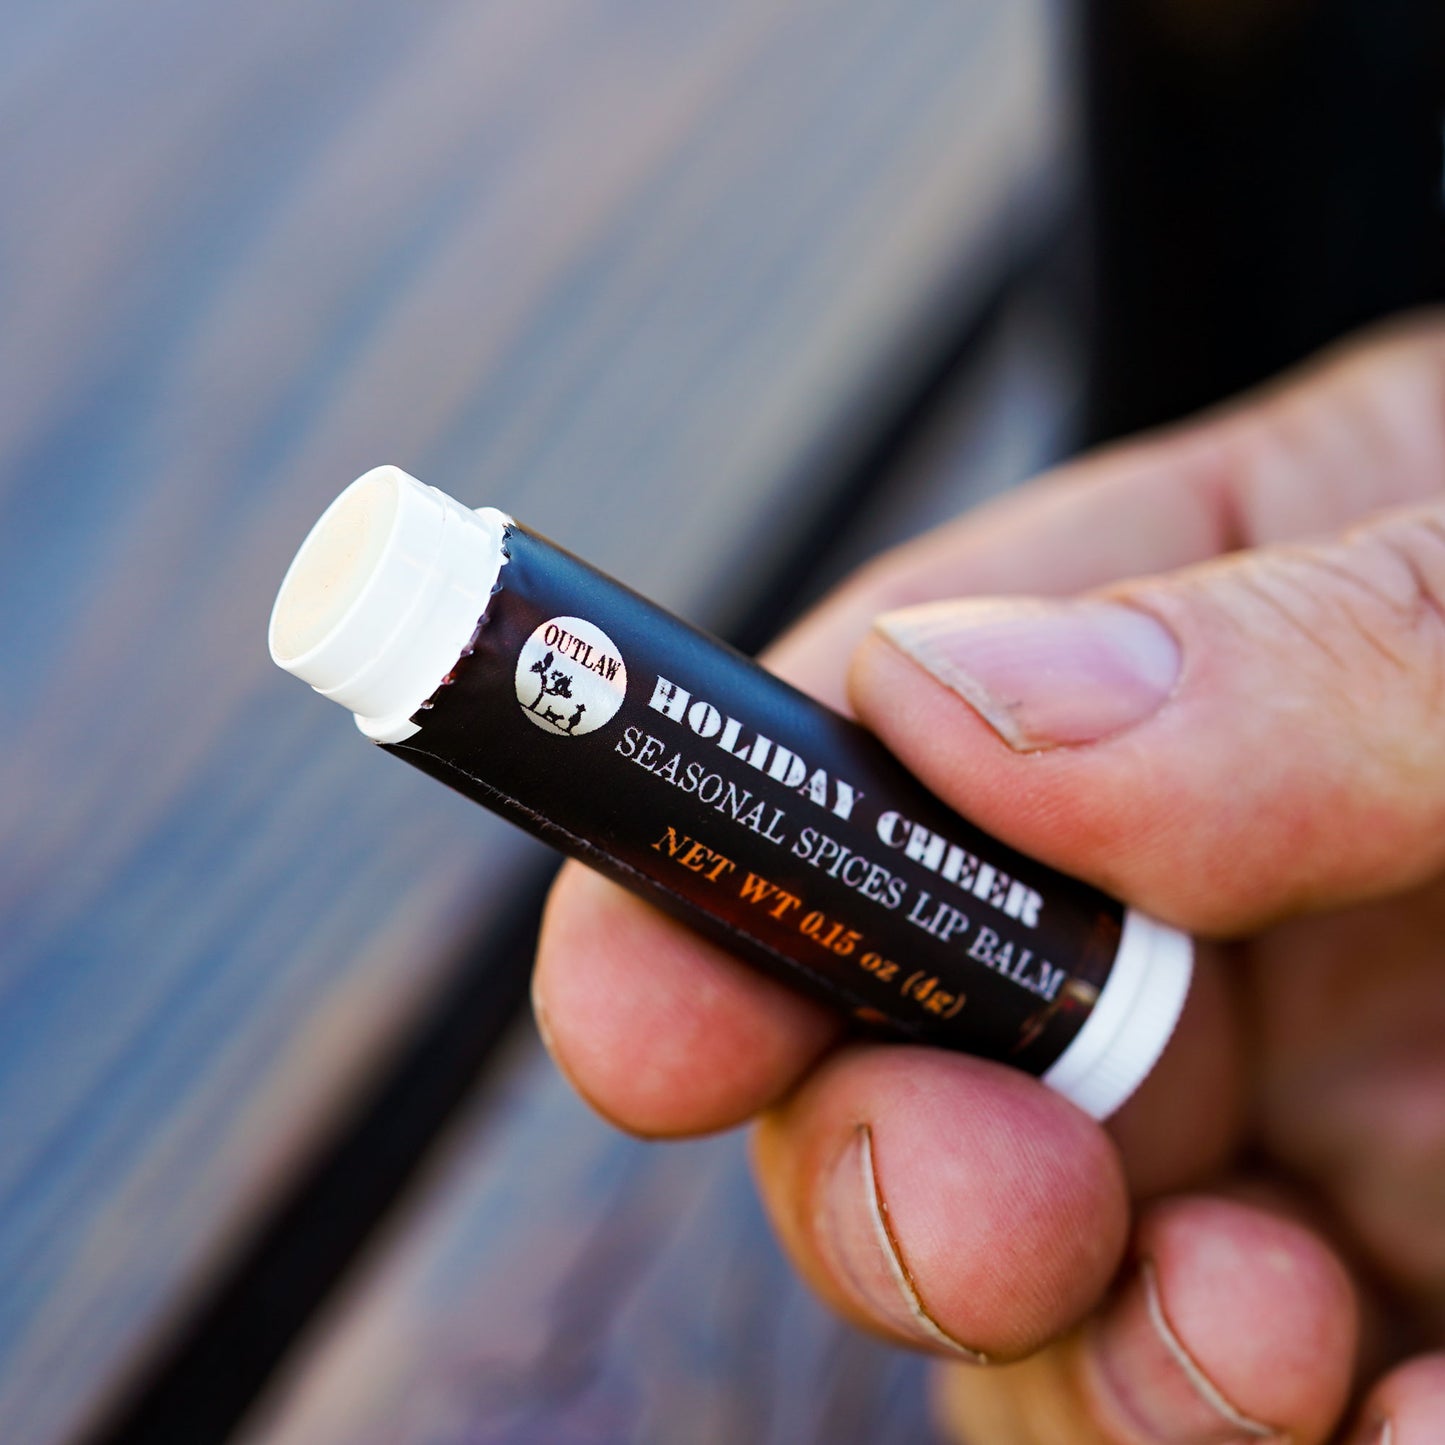 Outlaw Lip Balm - Delicious Lip Balm that Tastes Like Whiskey, Rum, Coffee, and more